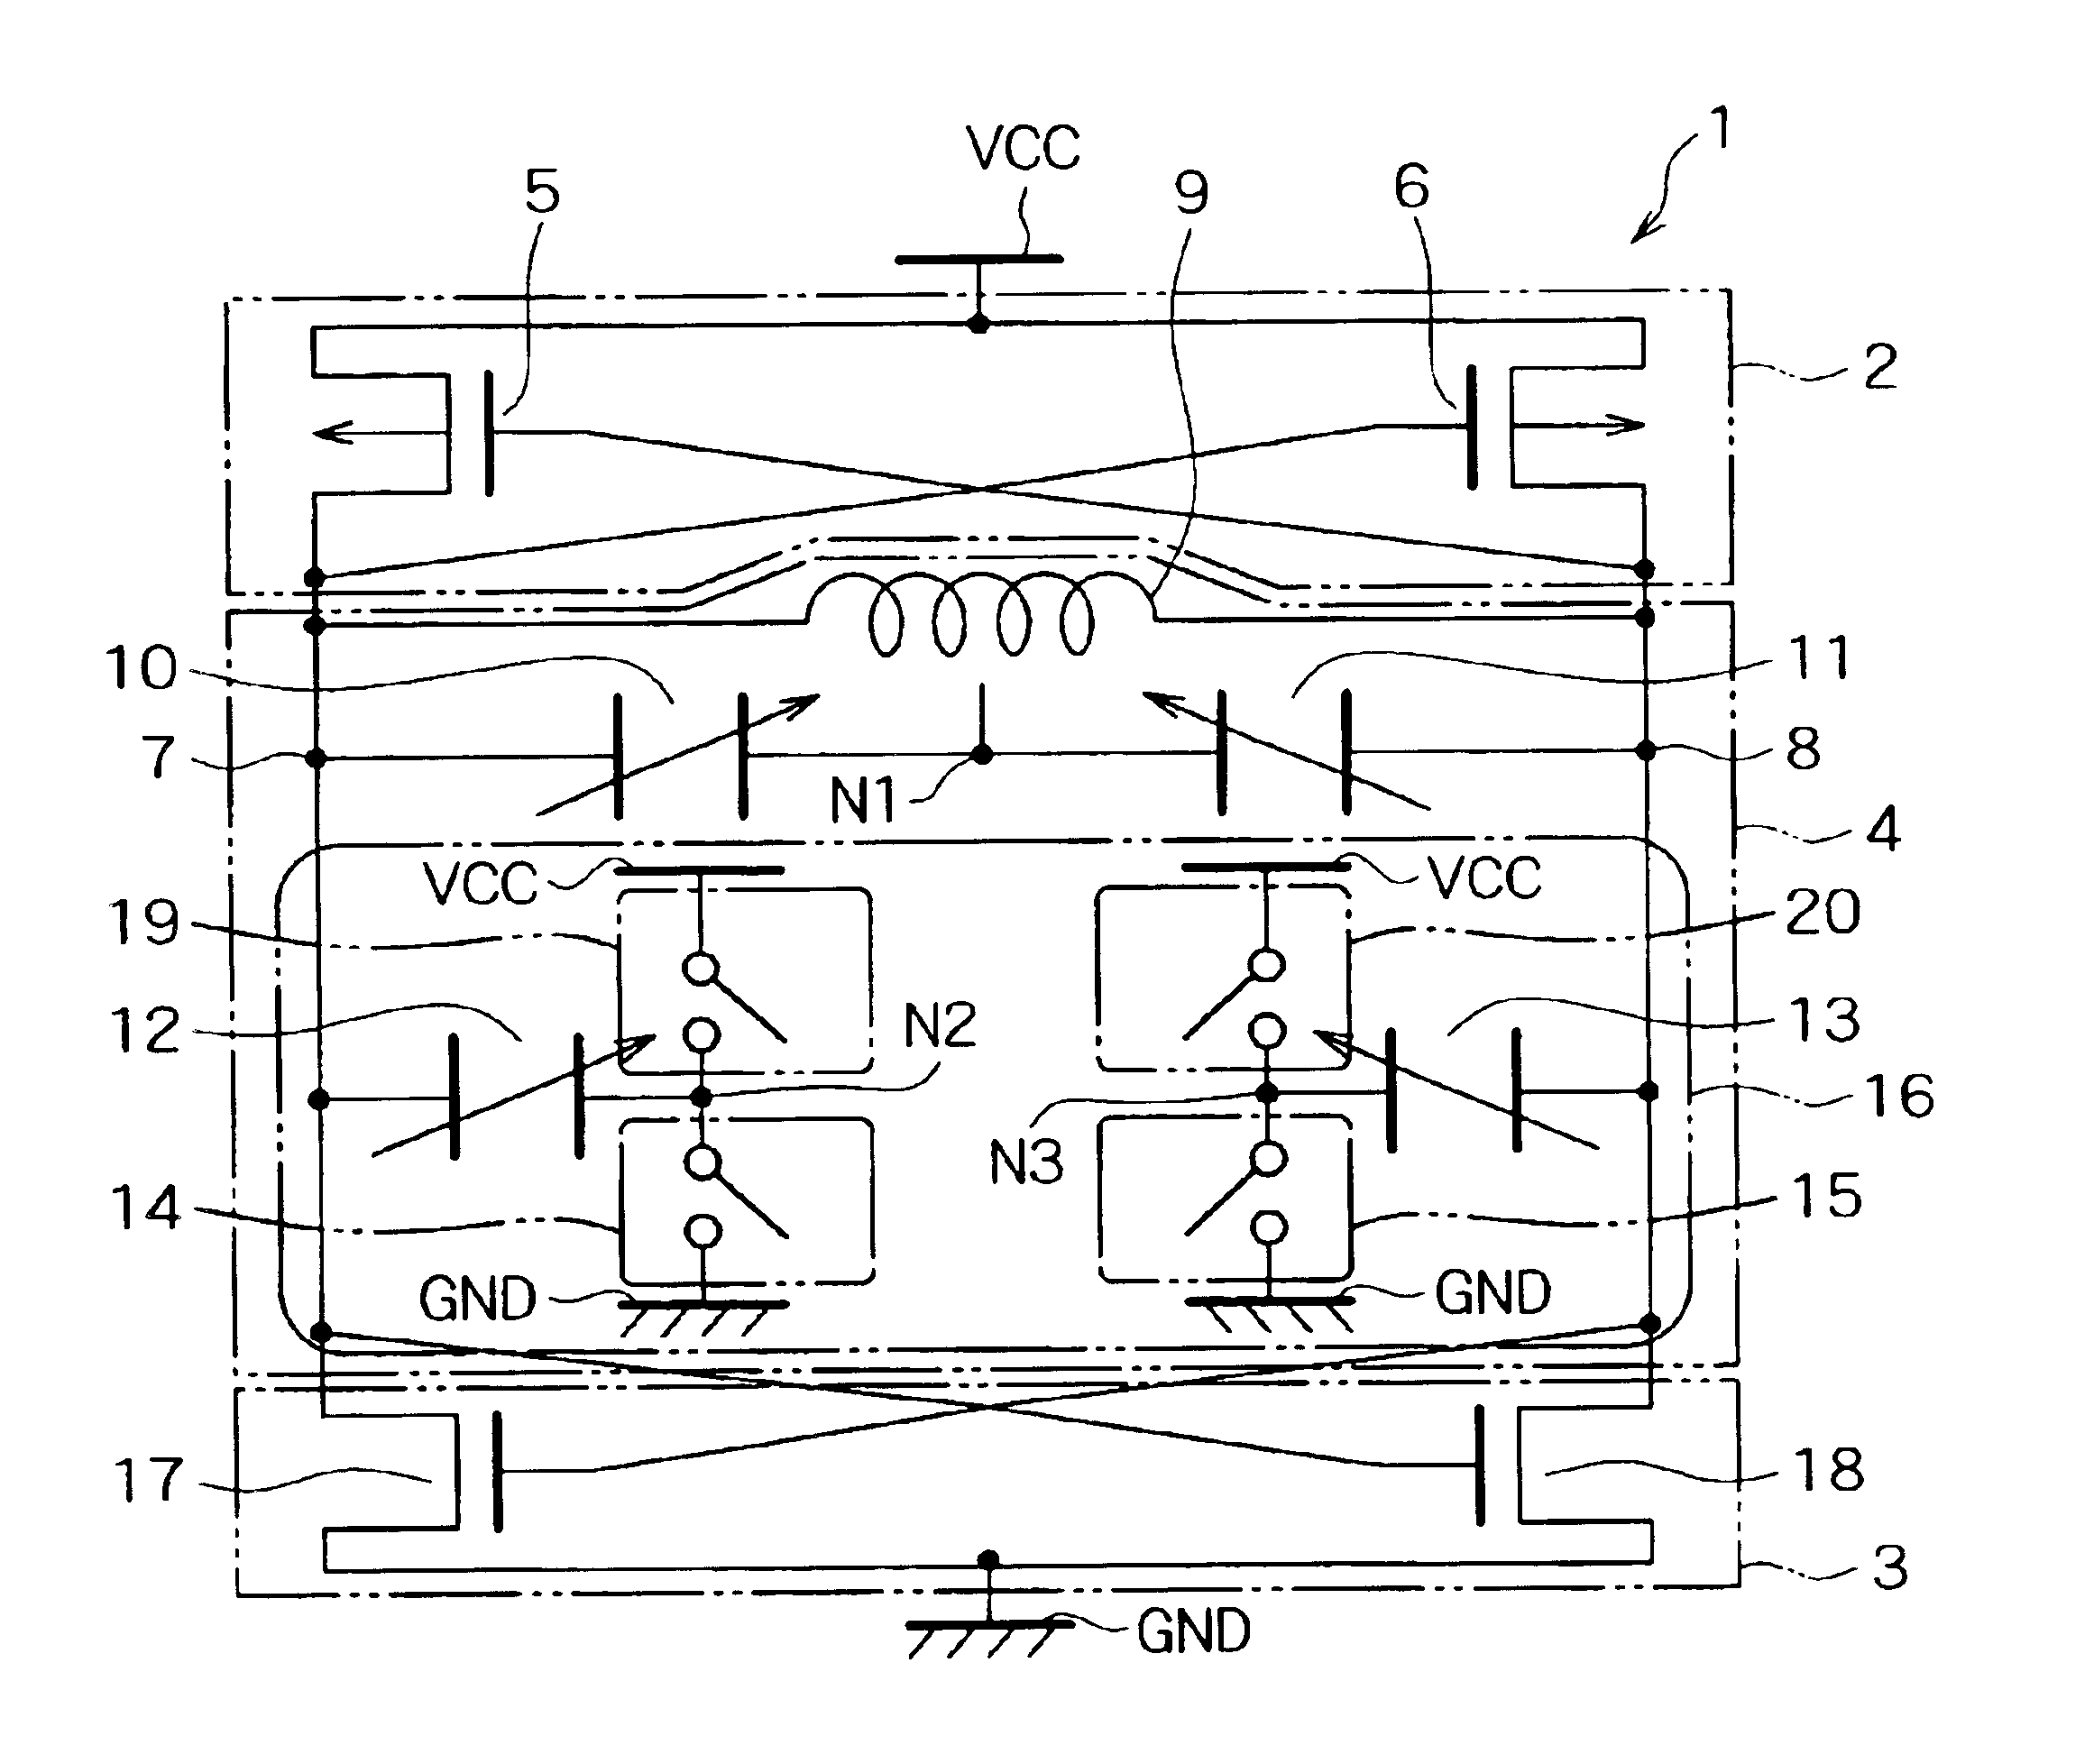 Voltage controlled oscillator with switched tuning capacitors